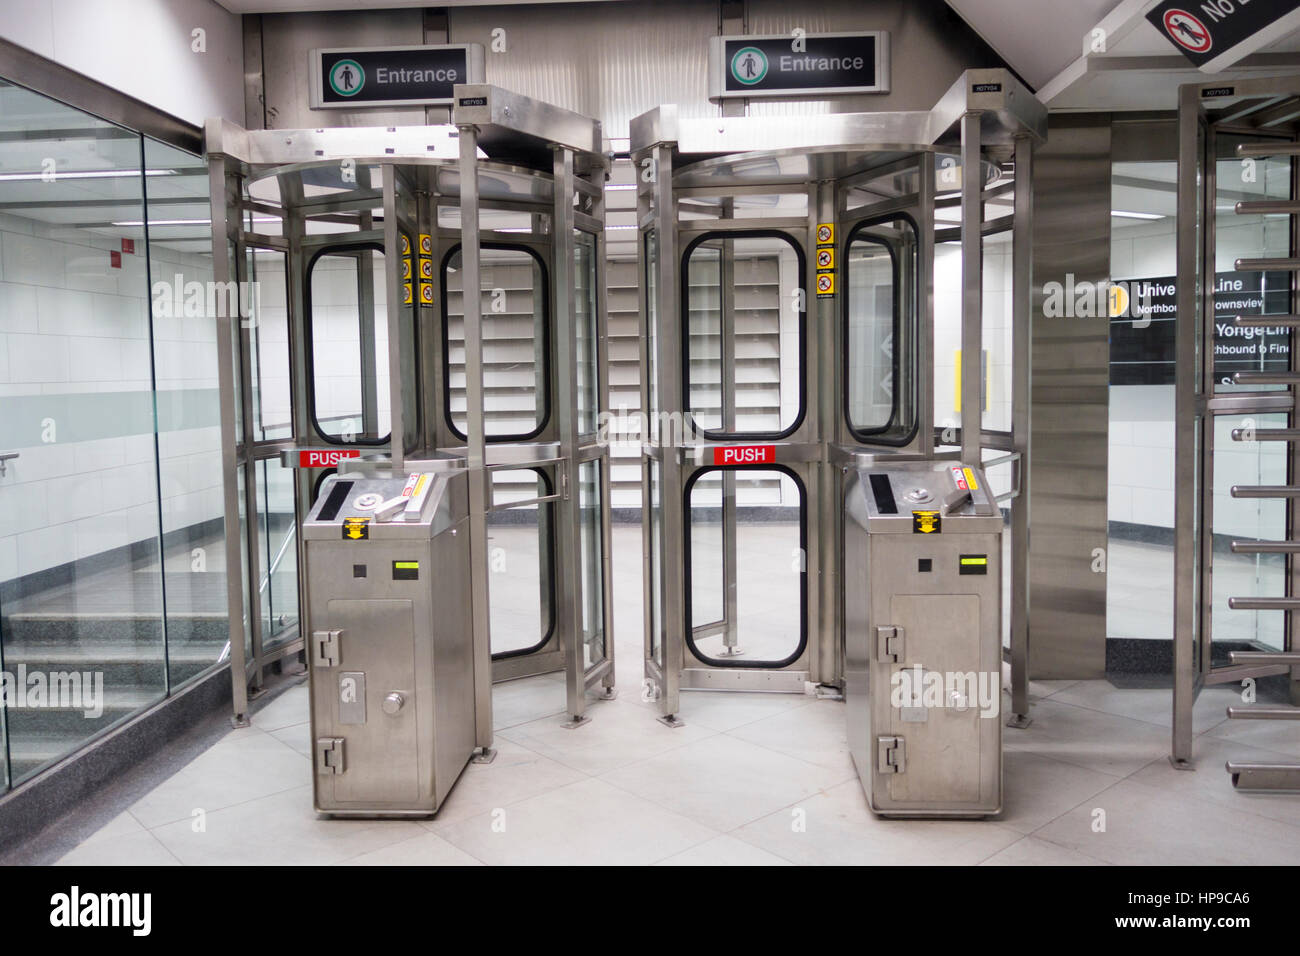 Presto paying machines using the honour system to enter the Union subway station in Toronto Ontario Canada Stock Photo